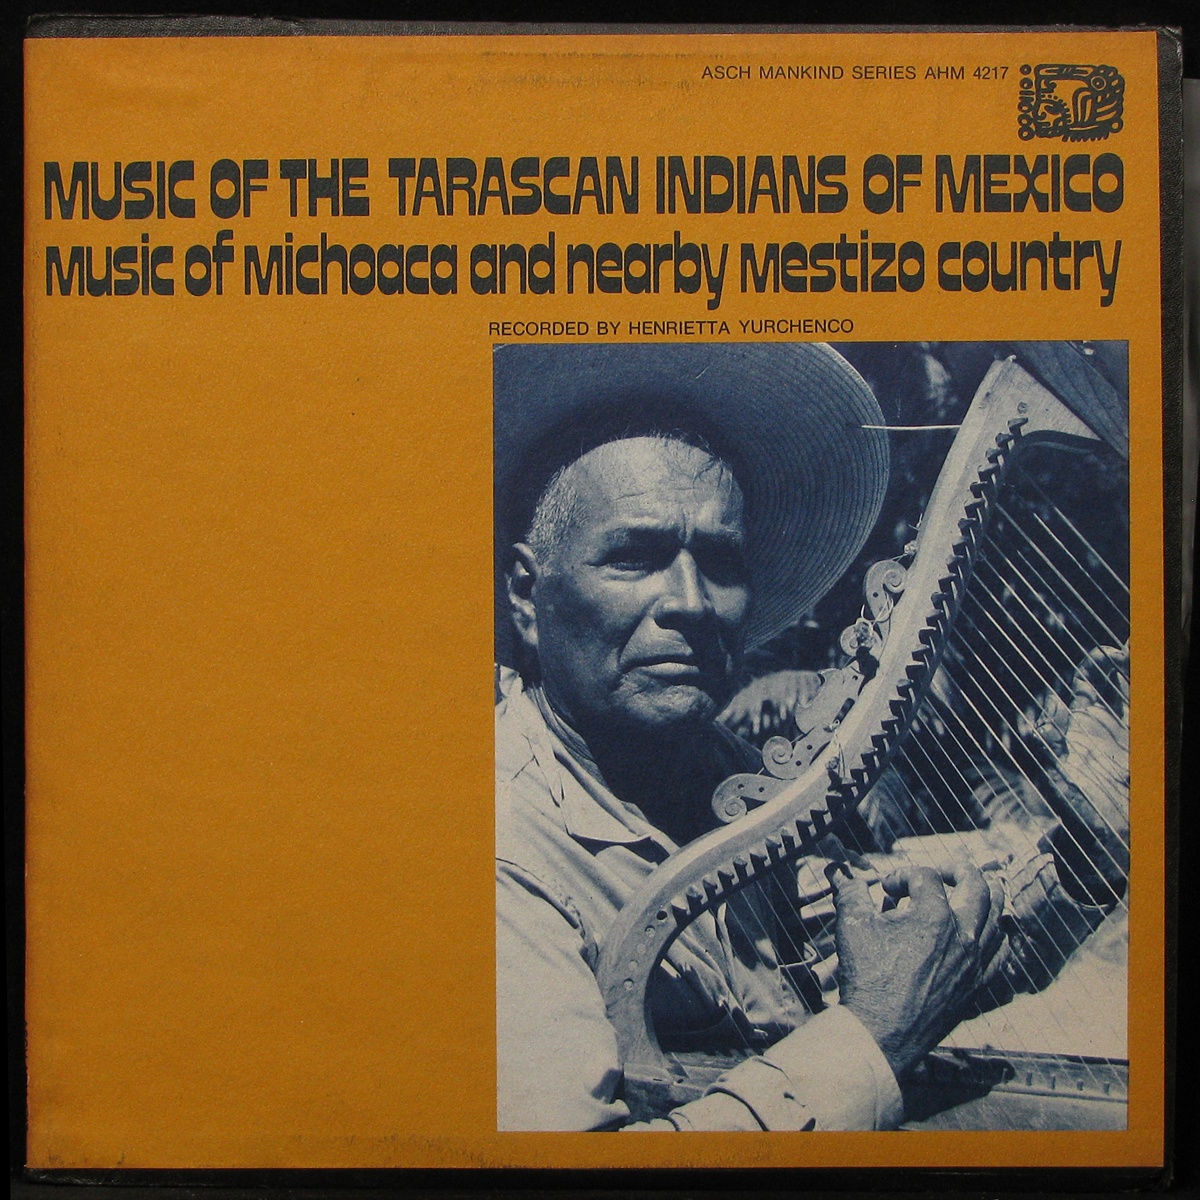 Music Of The Tarascan Indians Of Mexico / Music Of Michoaca And Nearby Mestizio Country